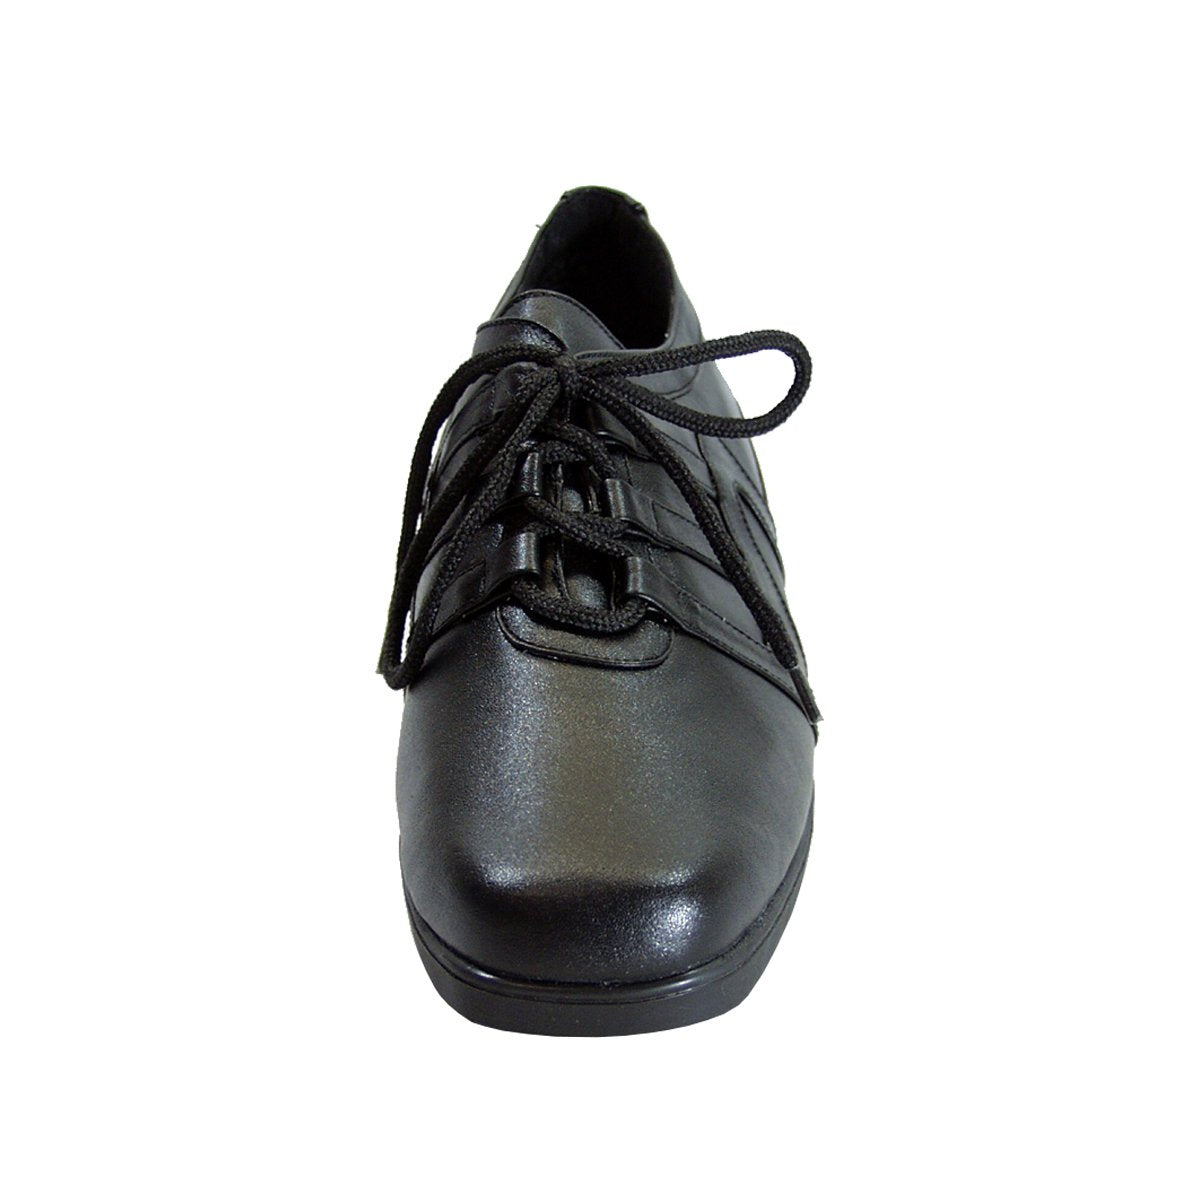 24 HOUR COMFORT Carmel Women's Wide Width Leather Lace-Up Shoes